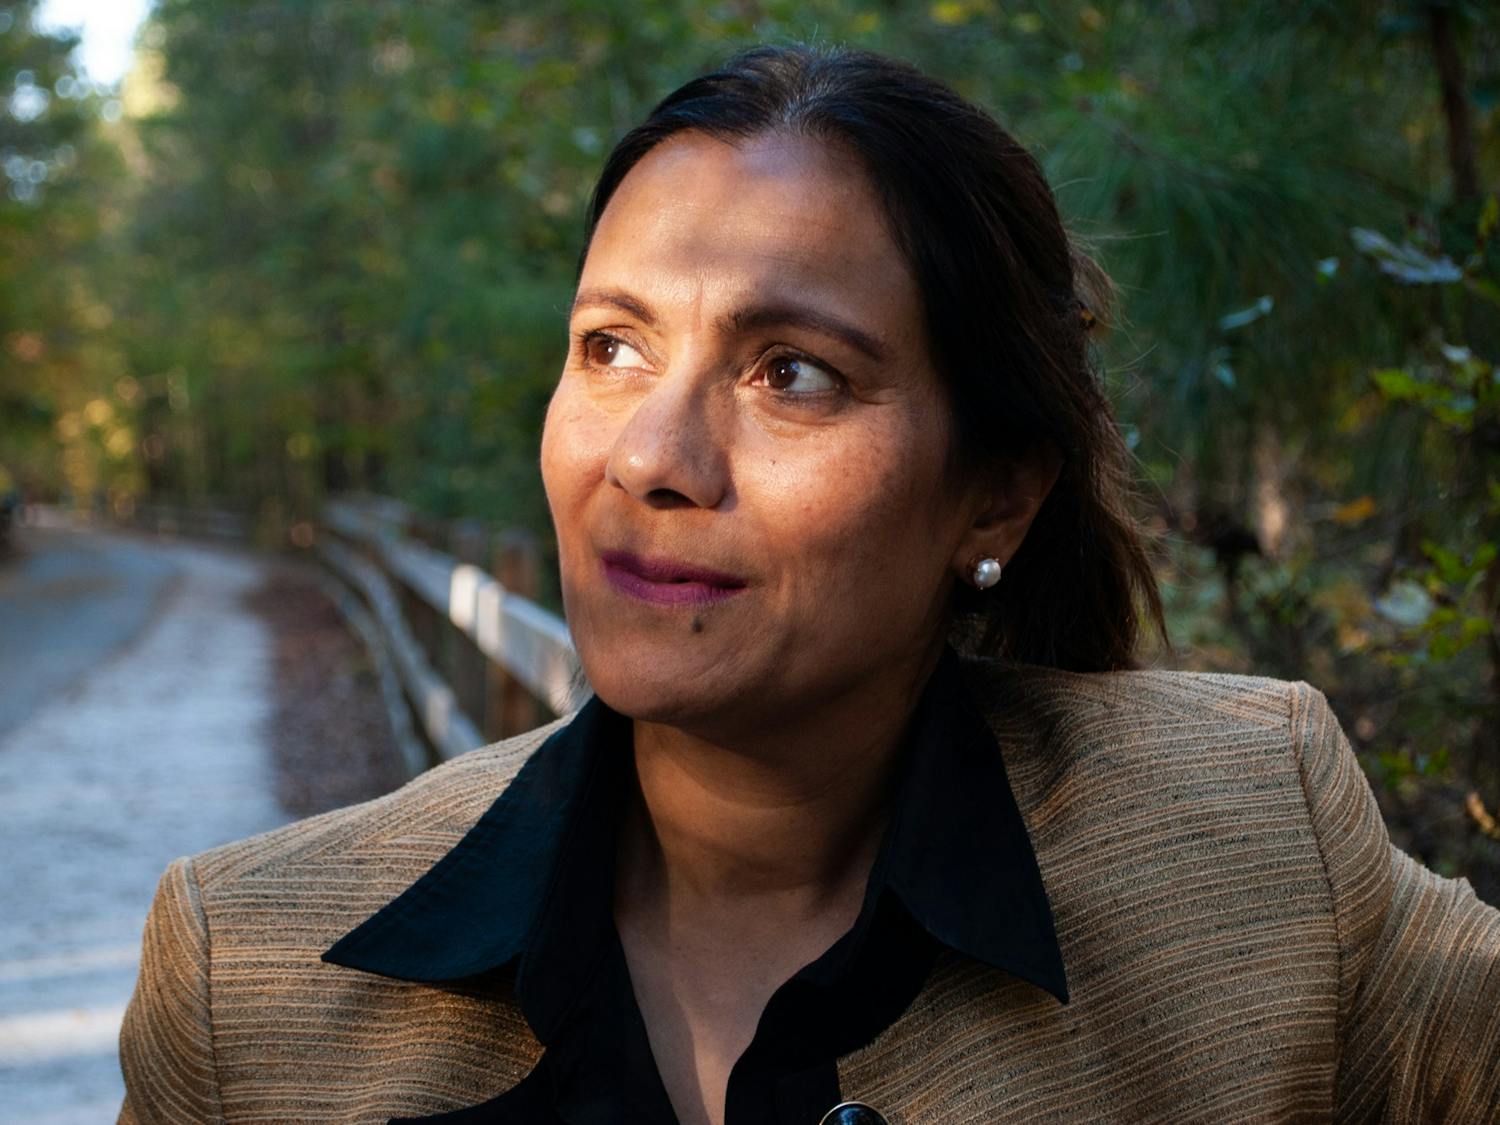 Seema Kak, the executive director of Kiran, poses for a portrait on Nov. 9. Kiran's mission is to empower and support South Asian victims of domestic violence in North Carolina.